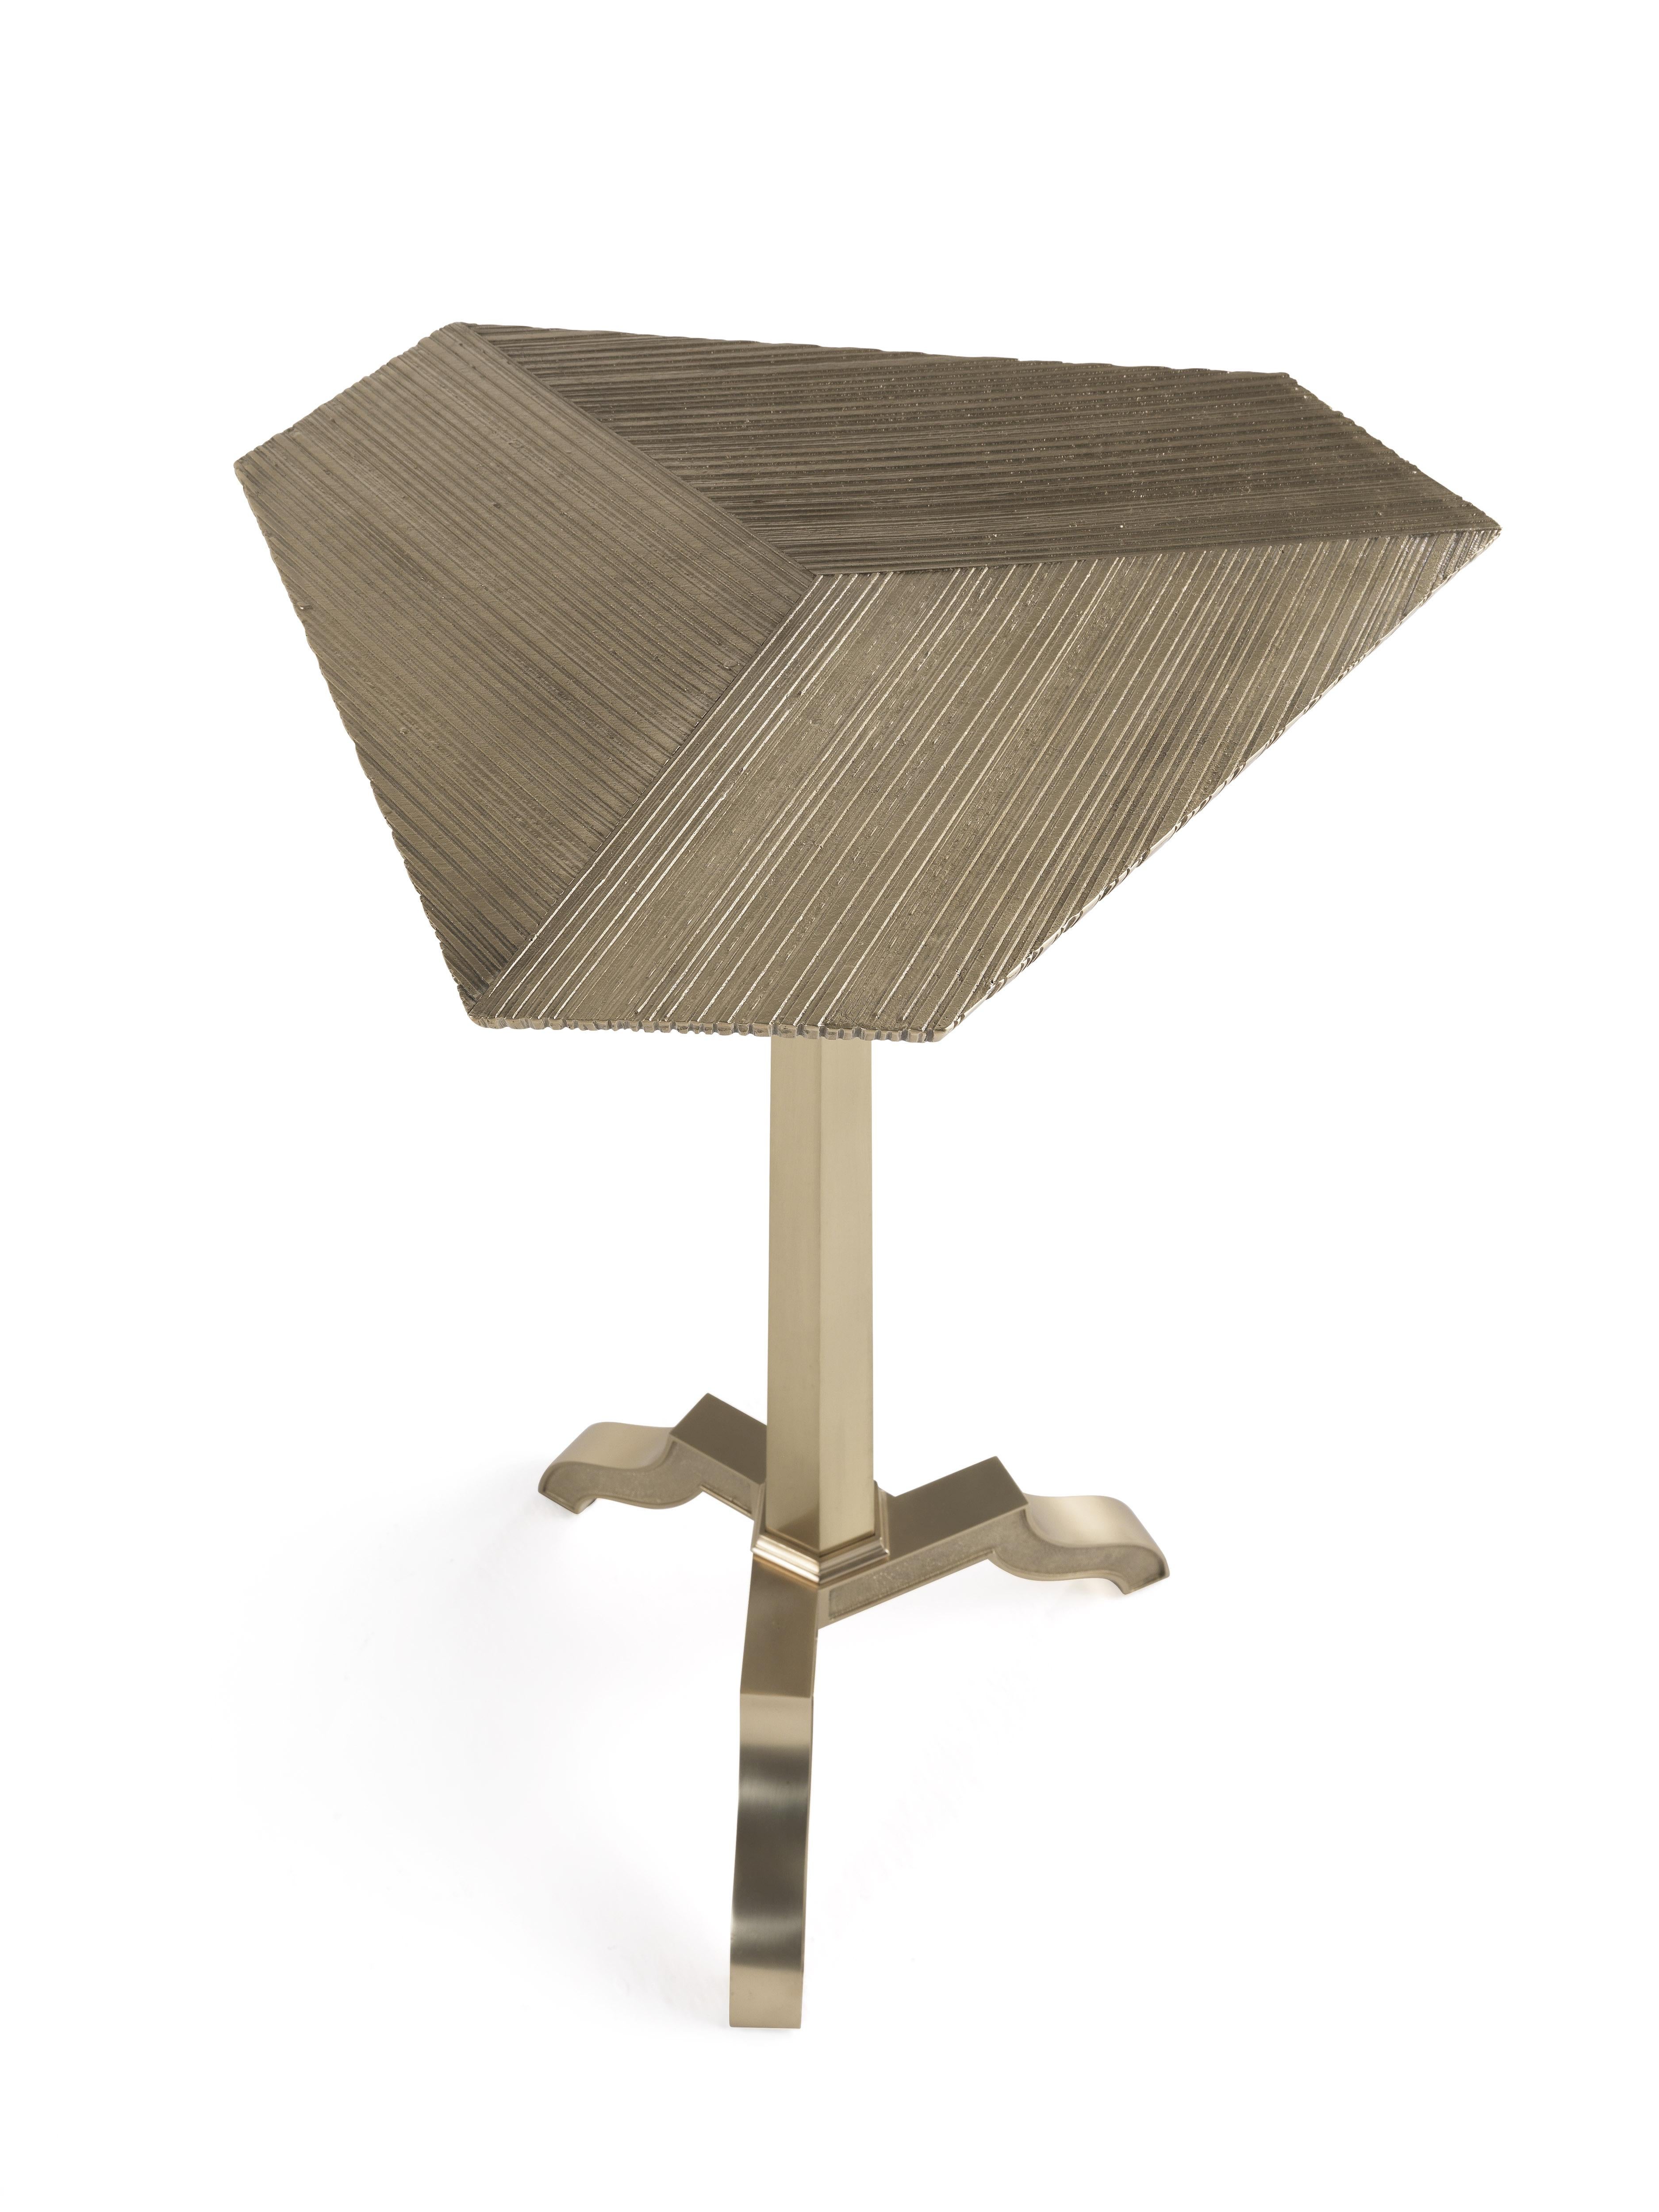 Scenographic style, classic design and sculptural charm for Tiara coffee table. The cast brass structure is embellished with chiseled details, while the top with irregular shape adds a materic and contemporary note that makes the coffee table a